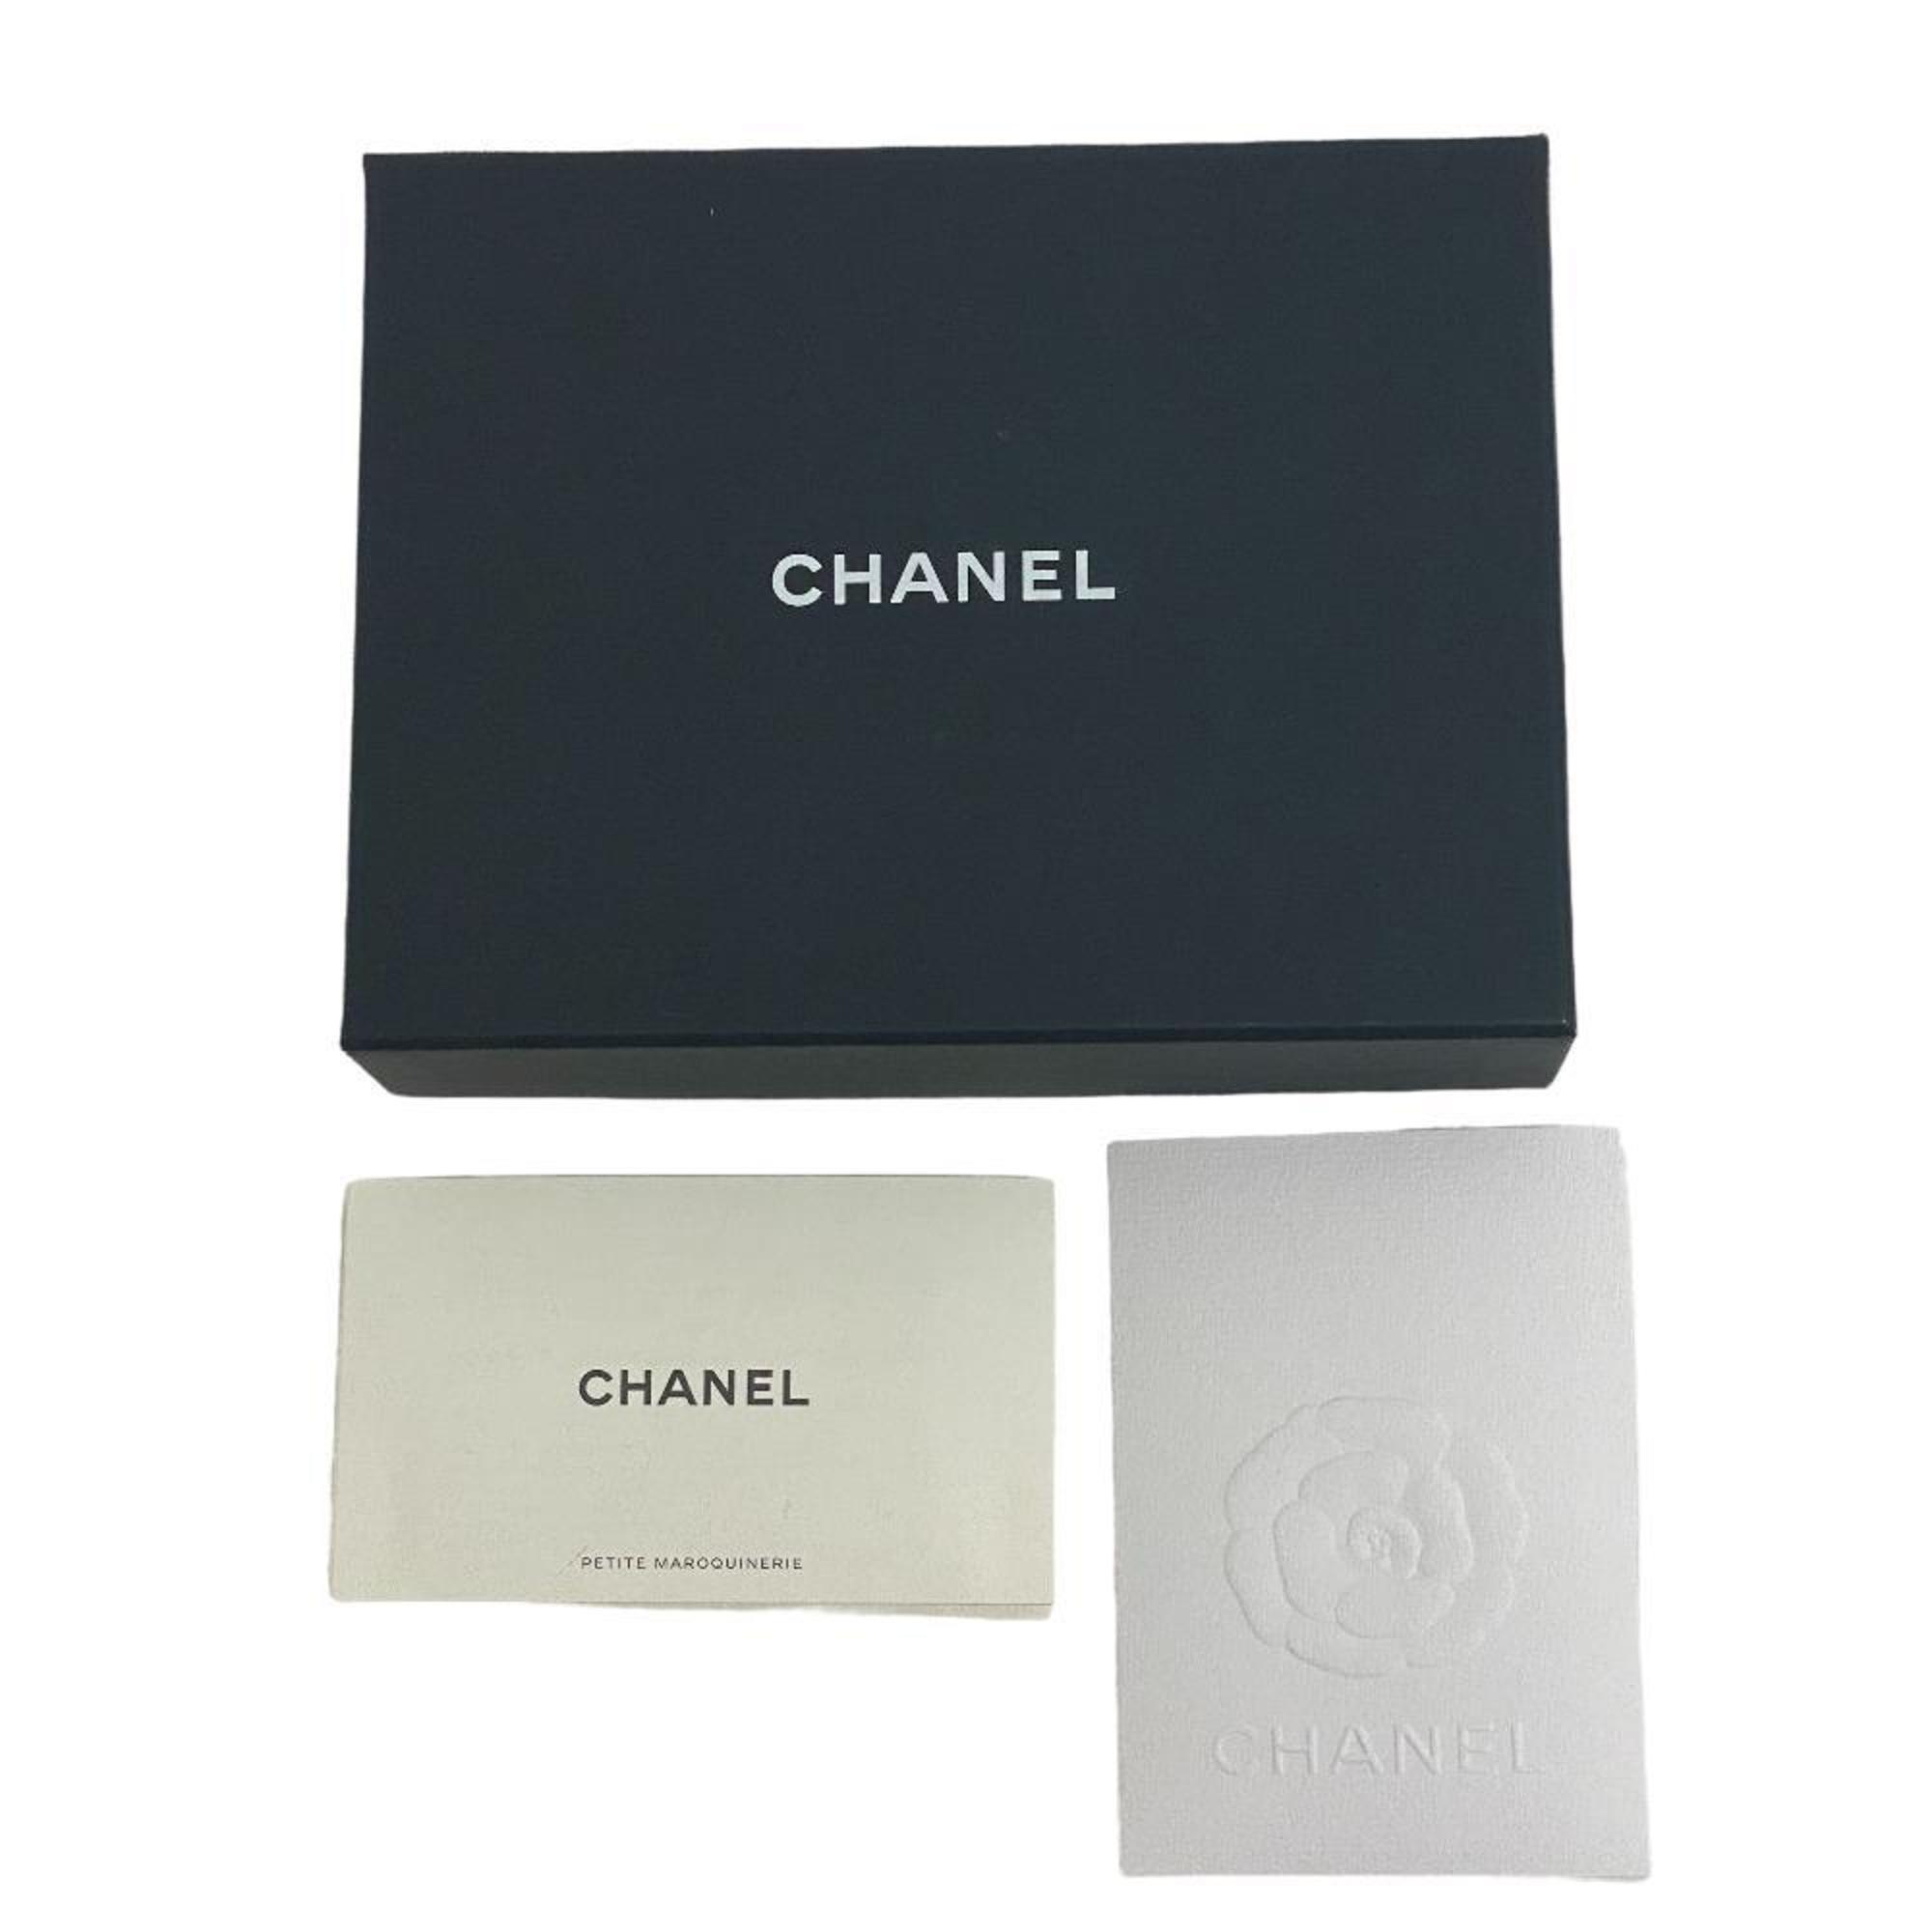 CHANEL Cocomark Compact Wallet Trifold Black Ladies